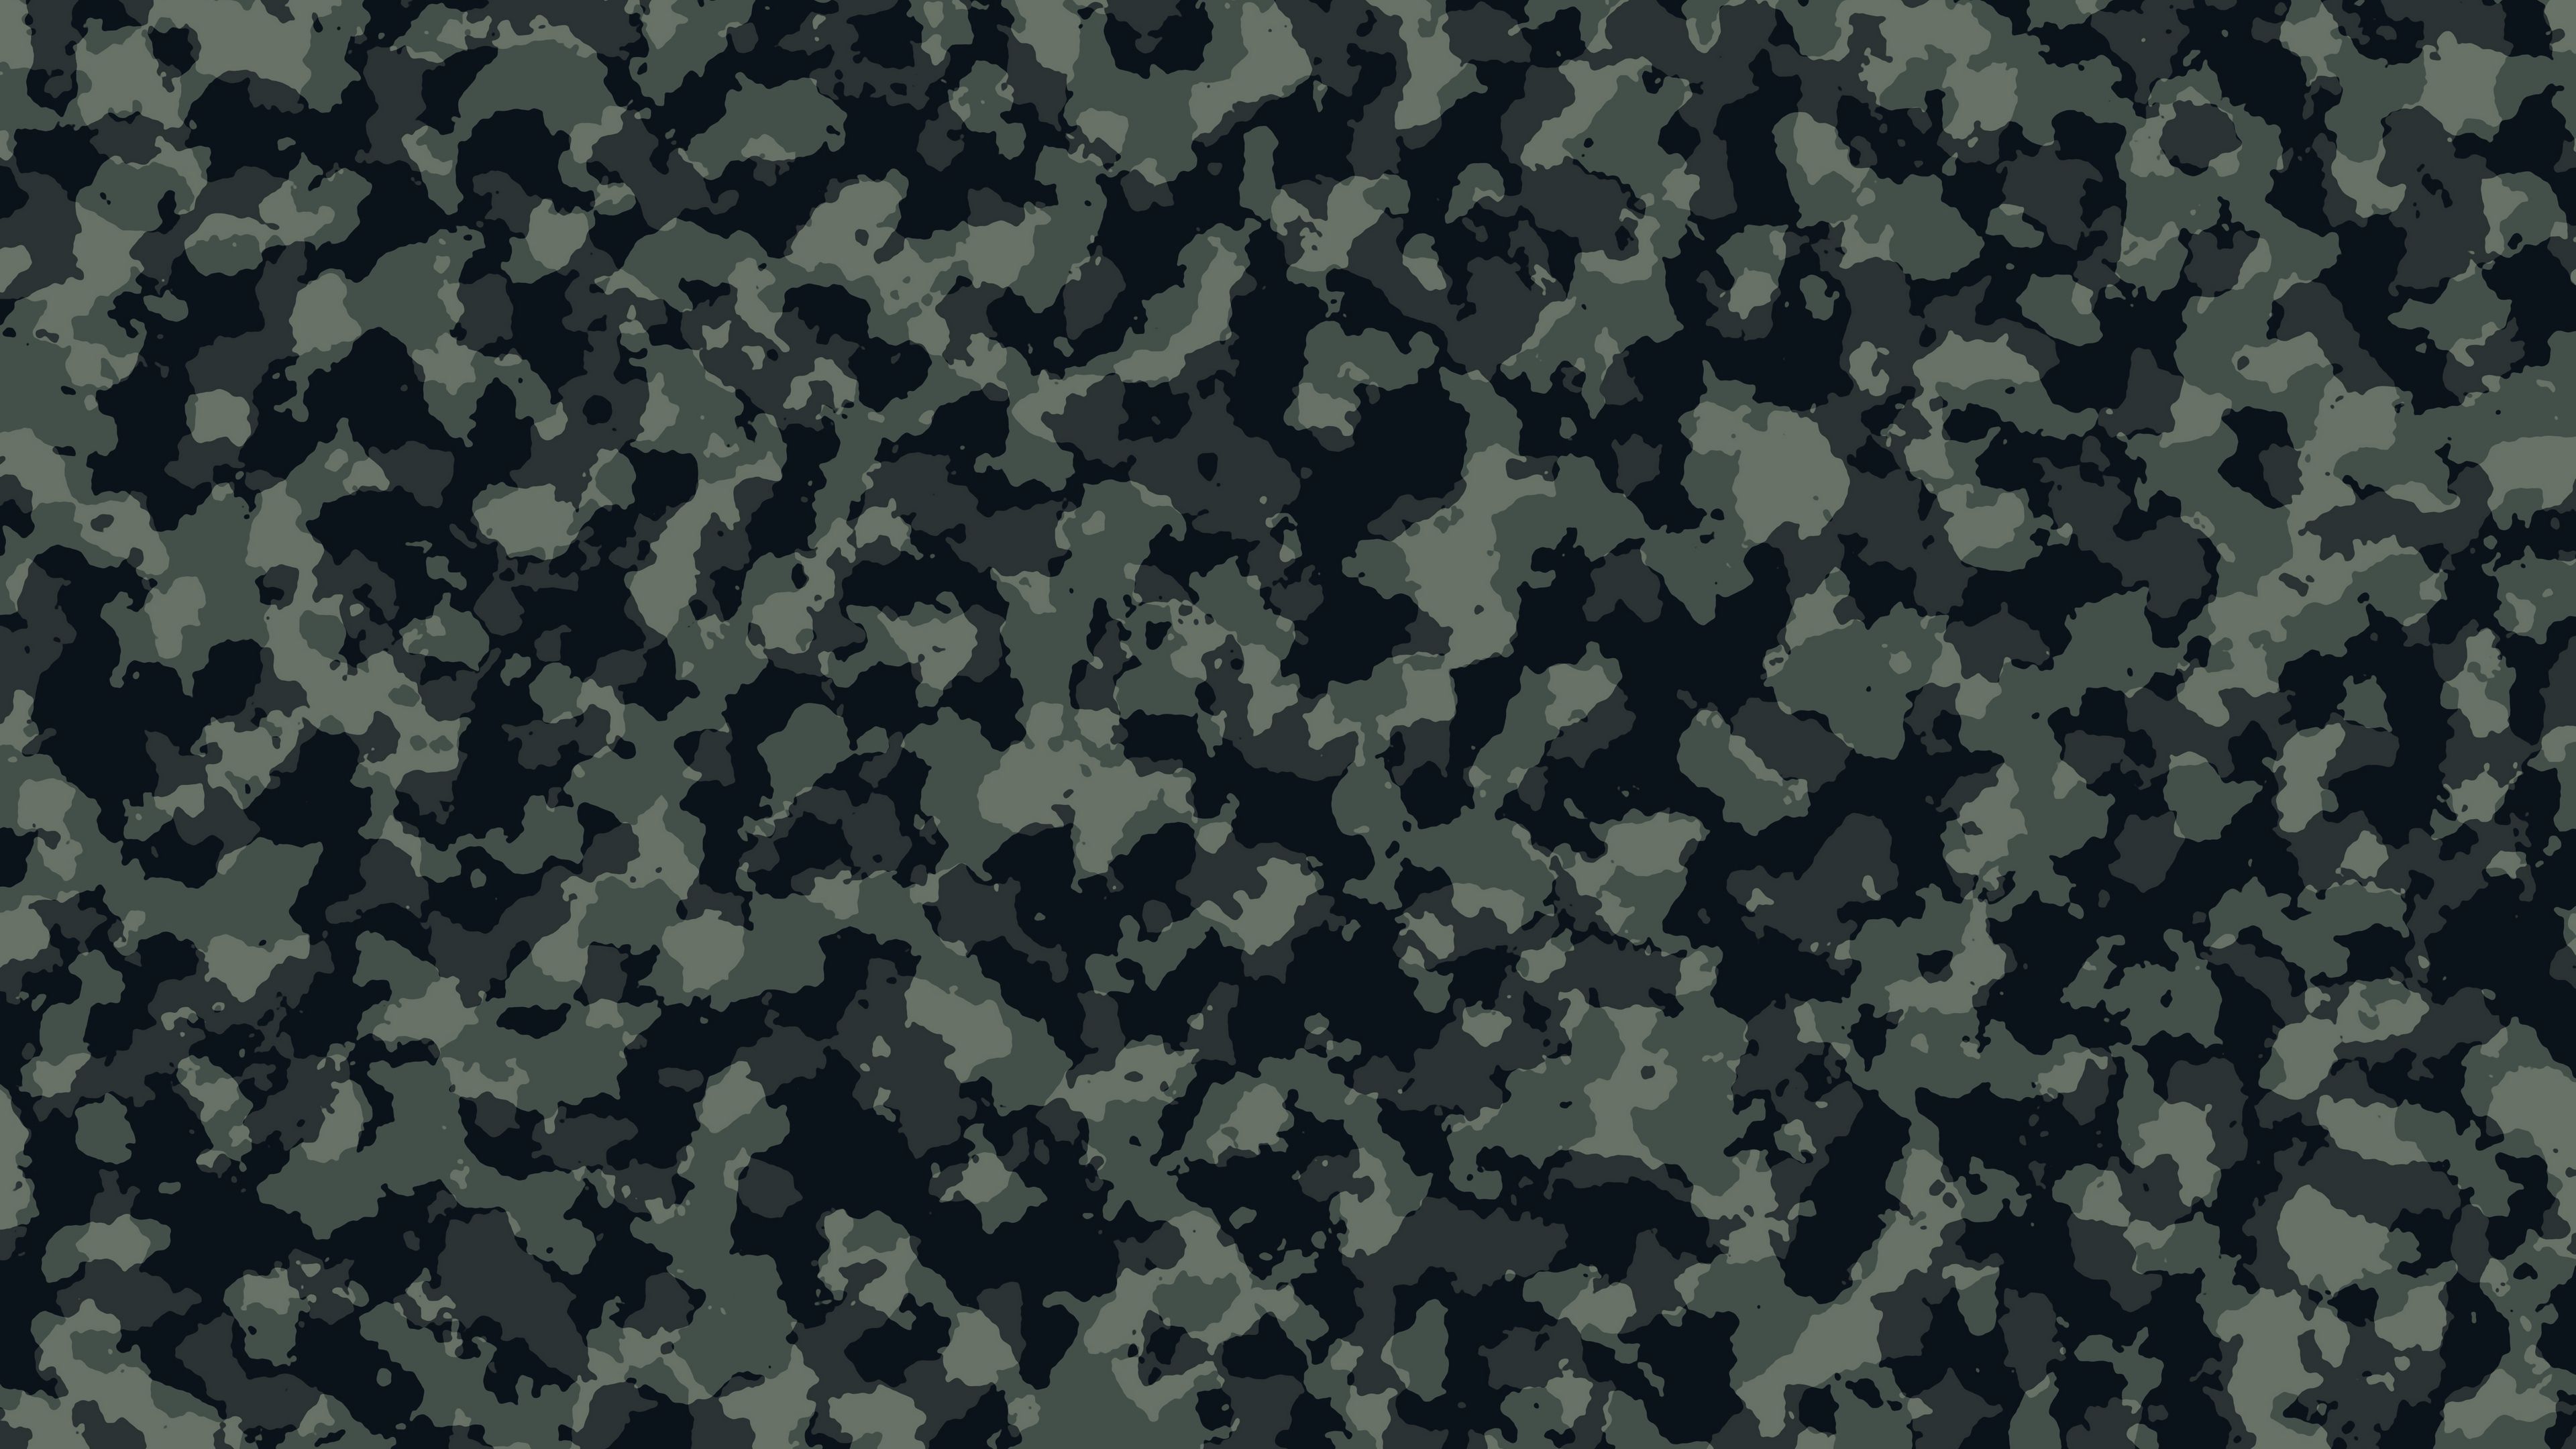 Wallpaper ID 15653 camouflage disguise pattern spots forest